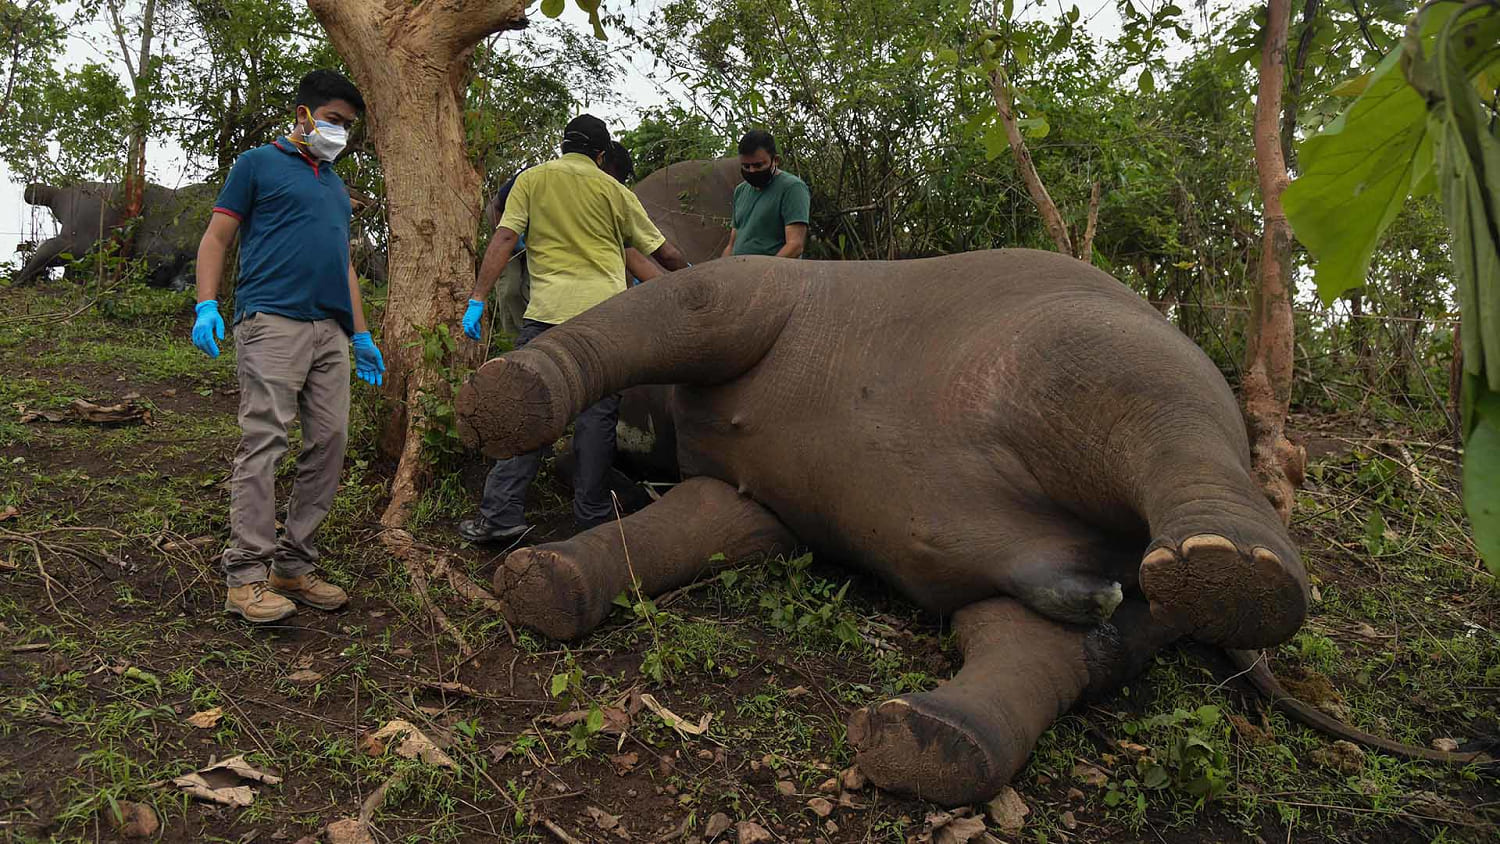 Elephants killed by lightning found in Indian forest